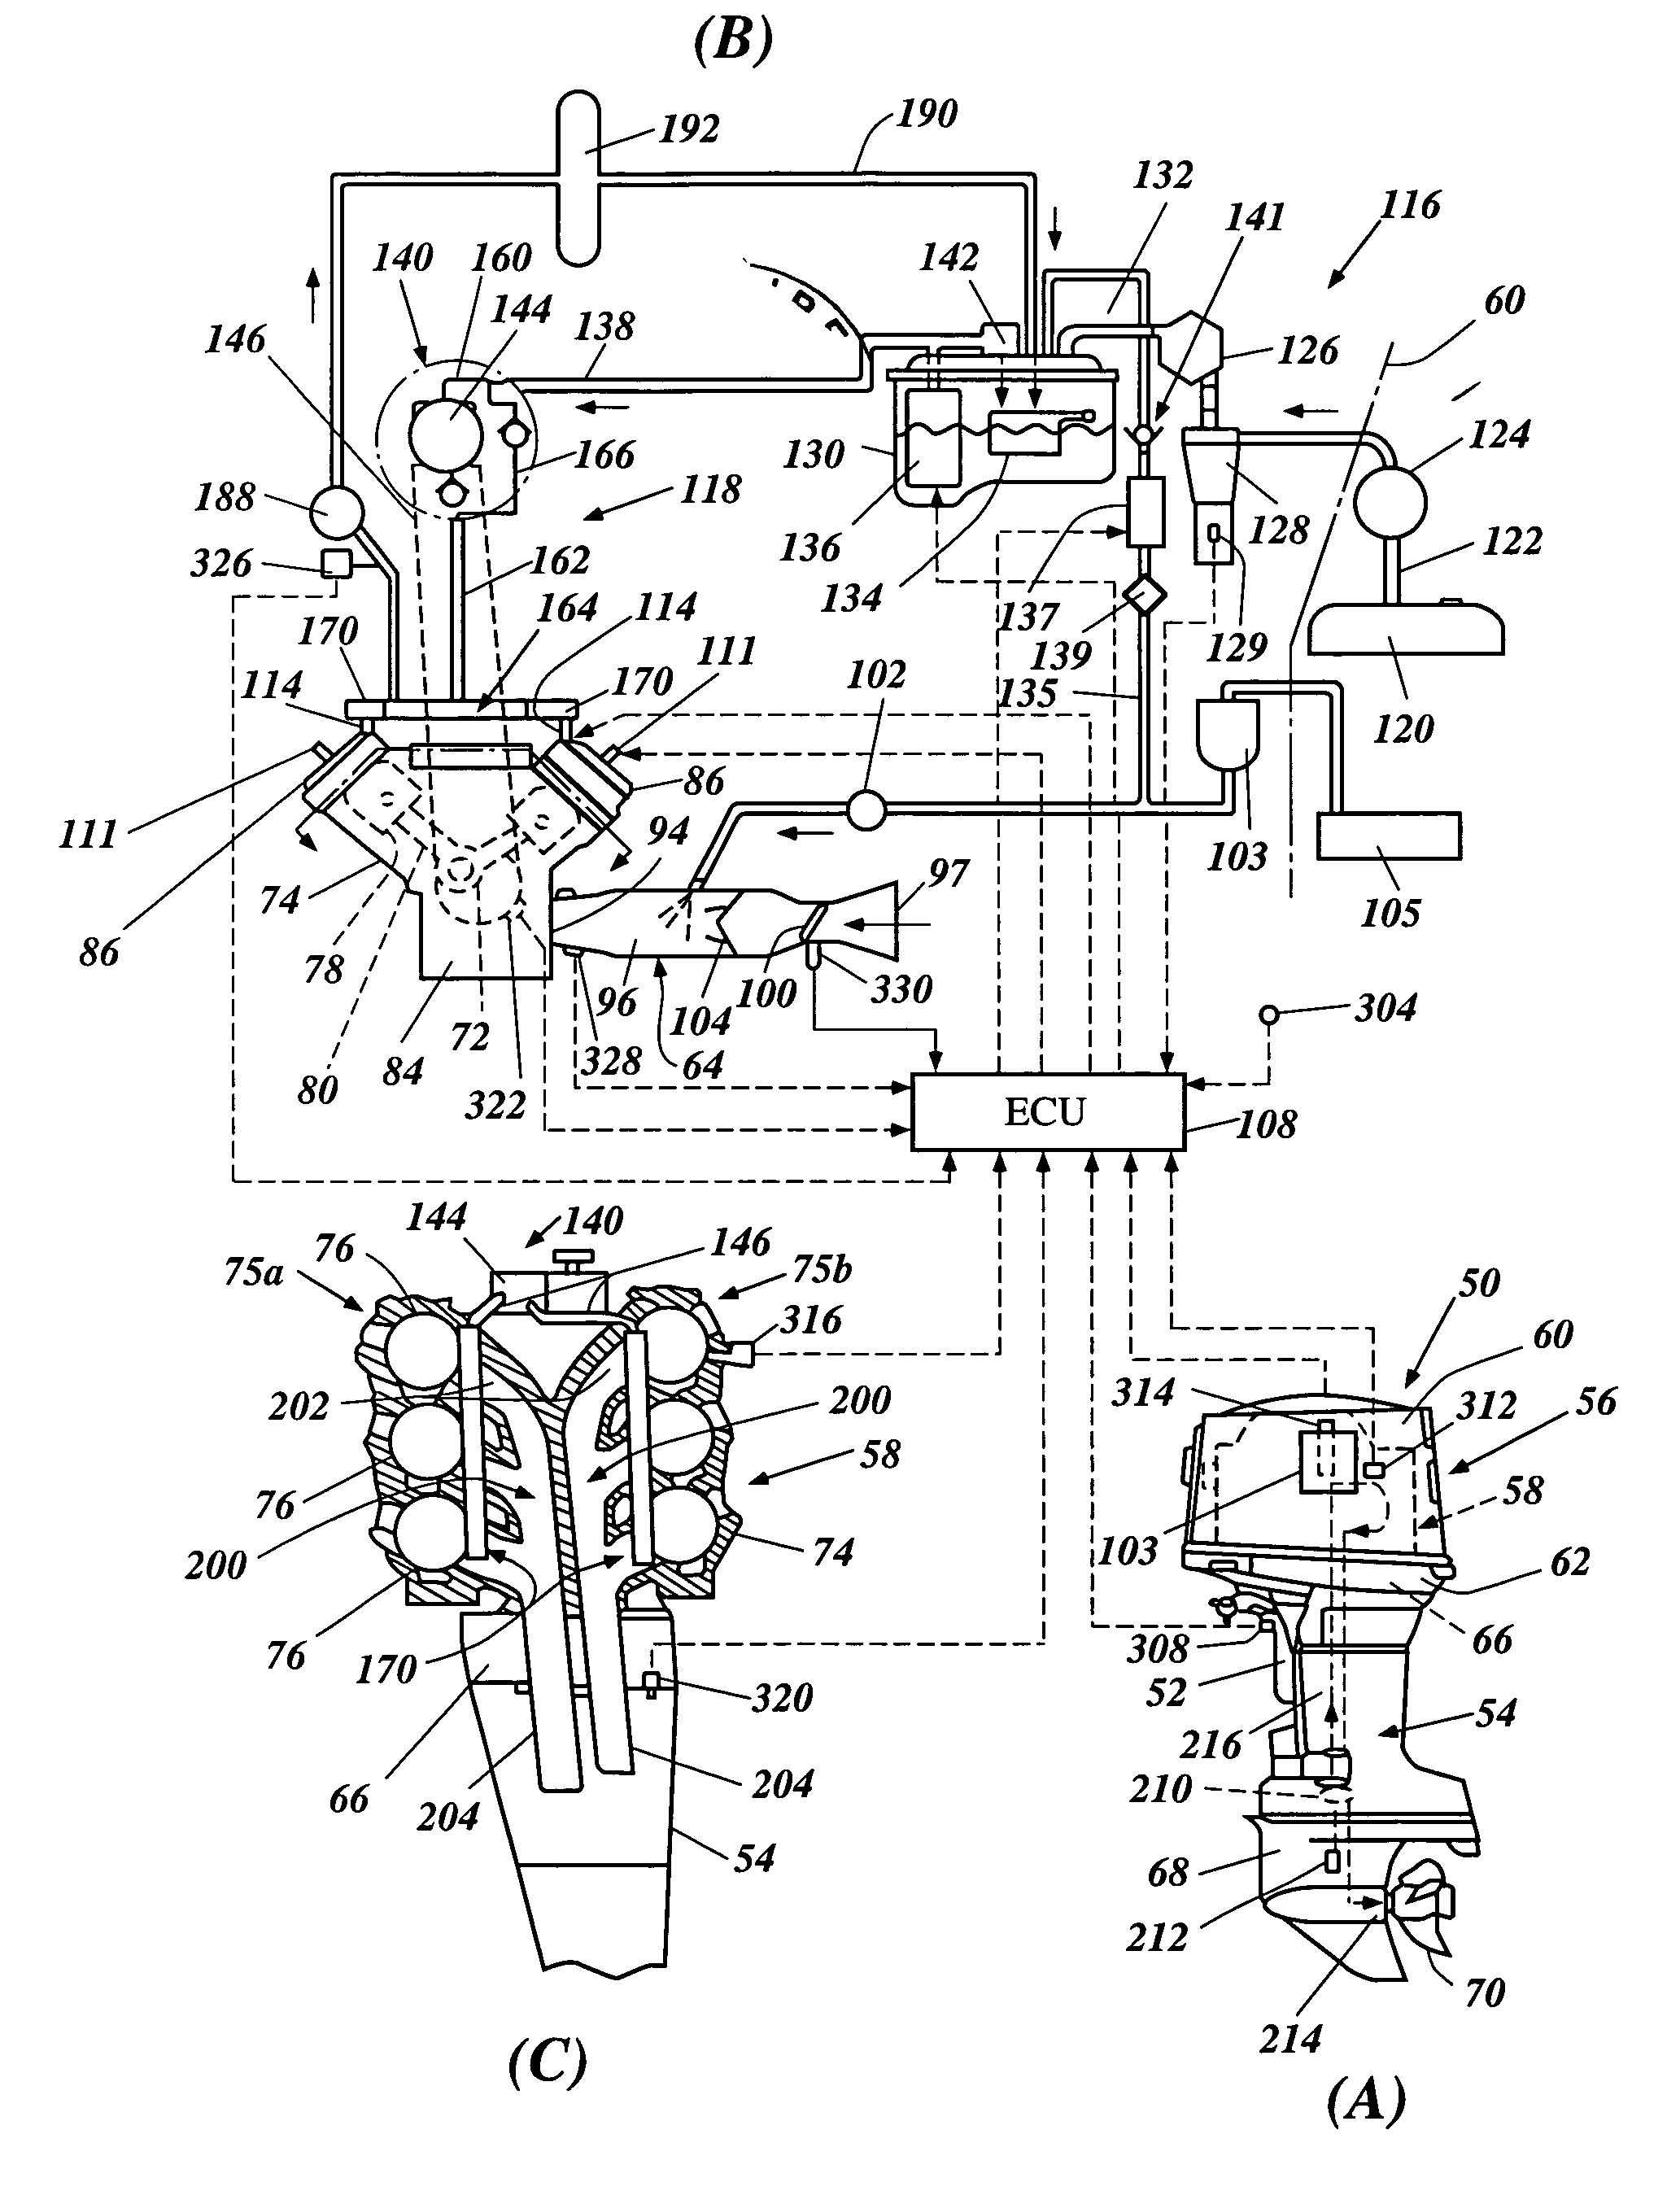 Fuel injection system for outboard motor